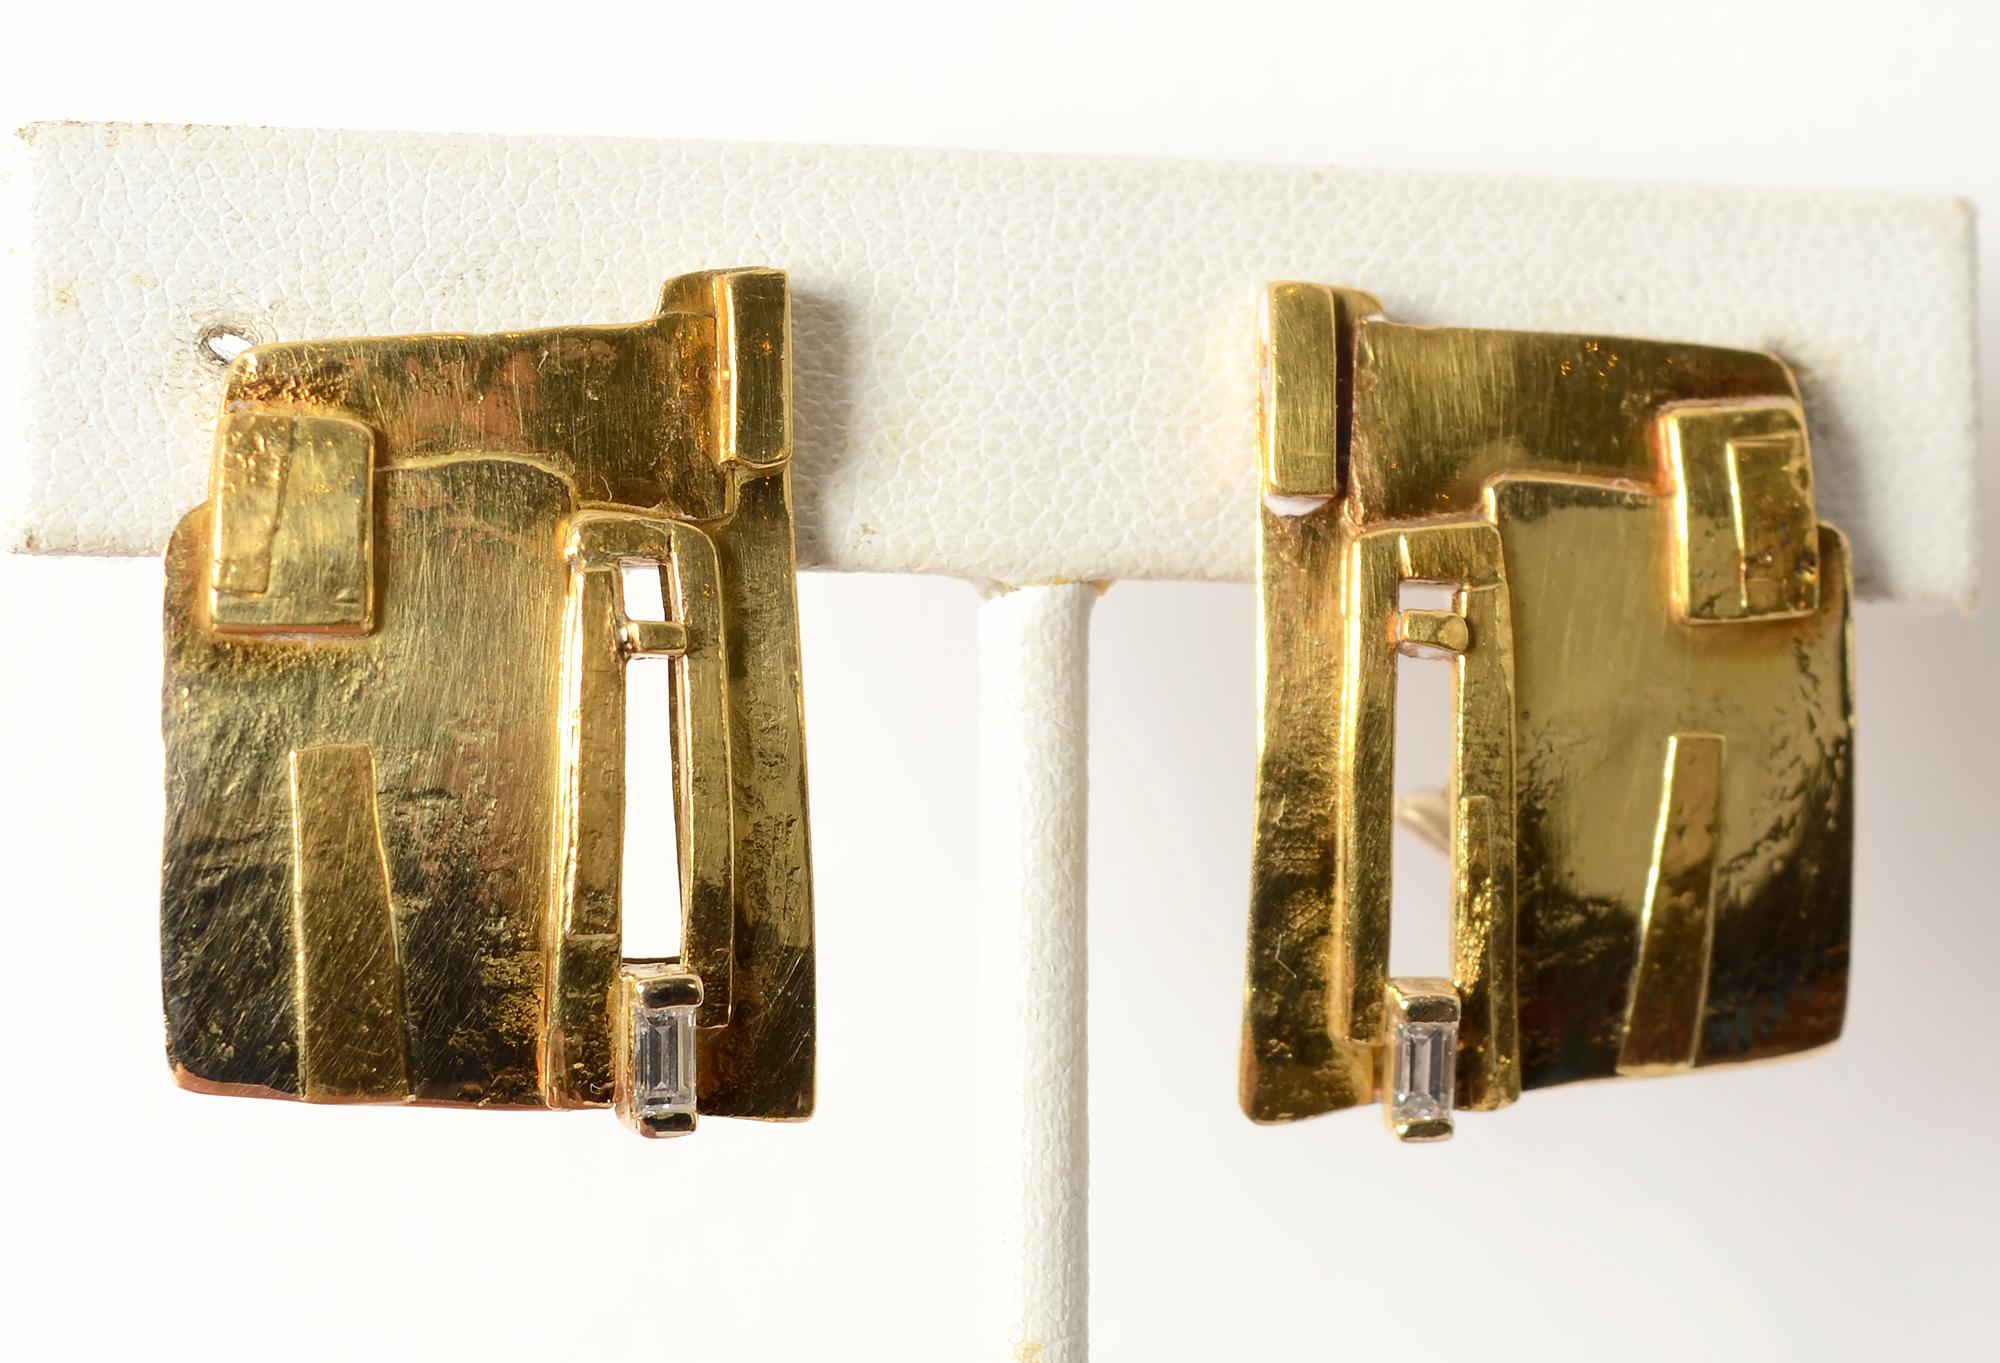 Abstract design earrings by American designer, Rena Koopman. The earrings are made of 18 and 22 karat gold with the sense of abstract painting often seen in Koopman's work. A small rectangular diamond at the bottom of each dresses up the earrings